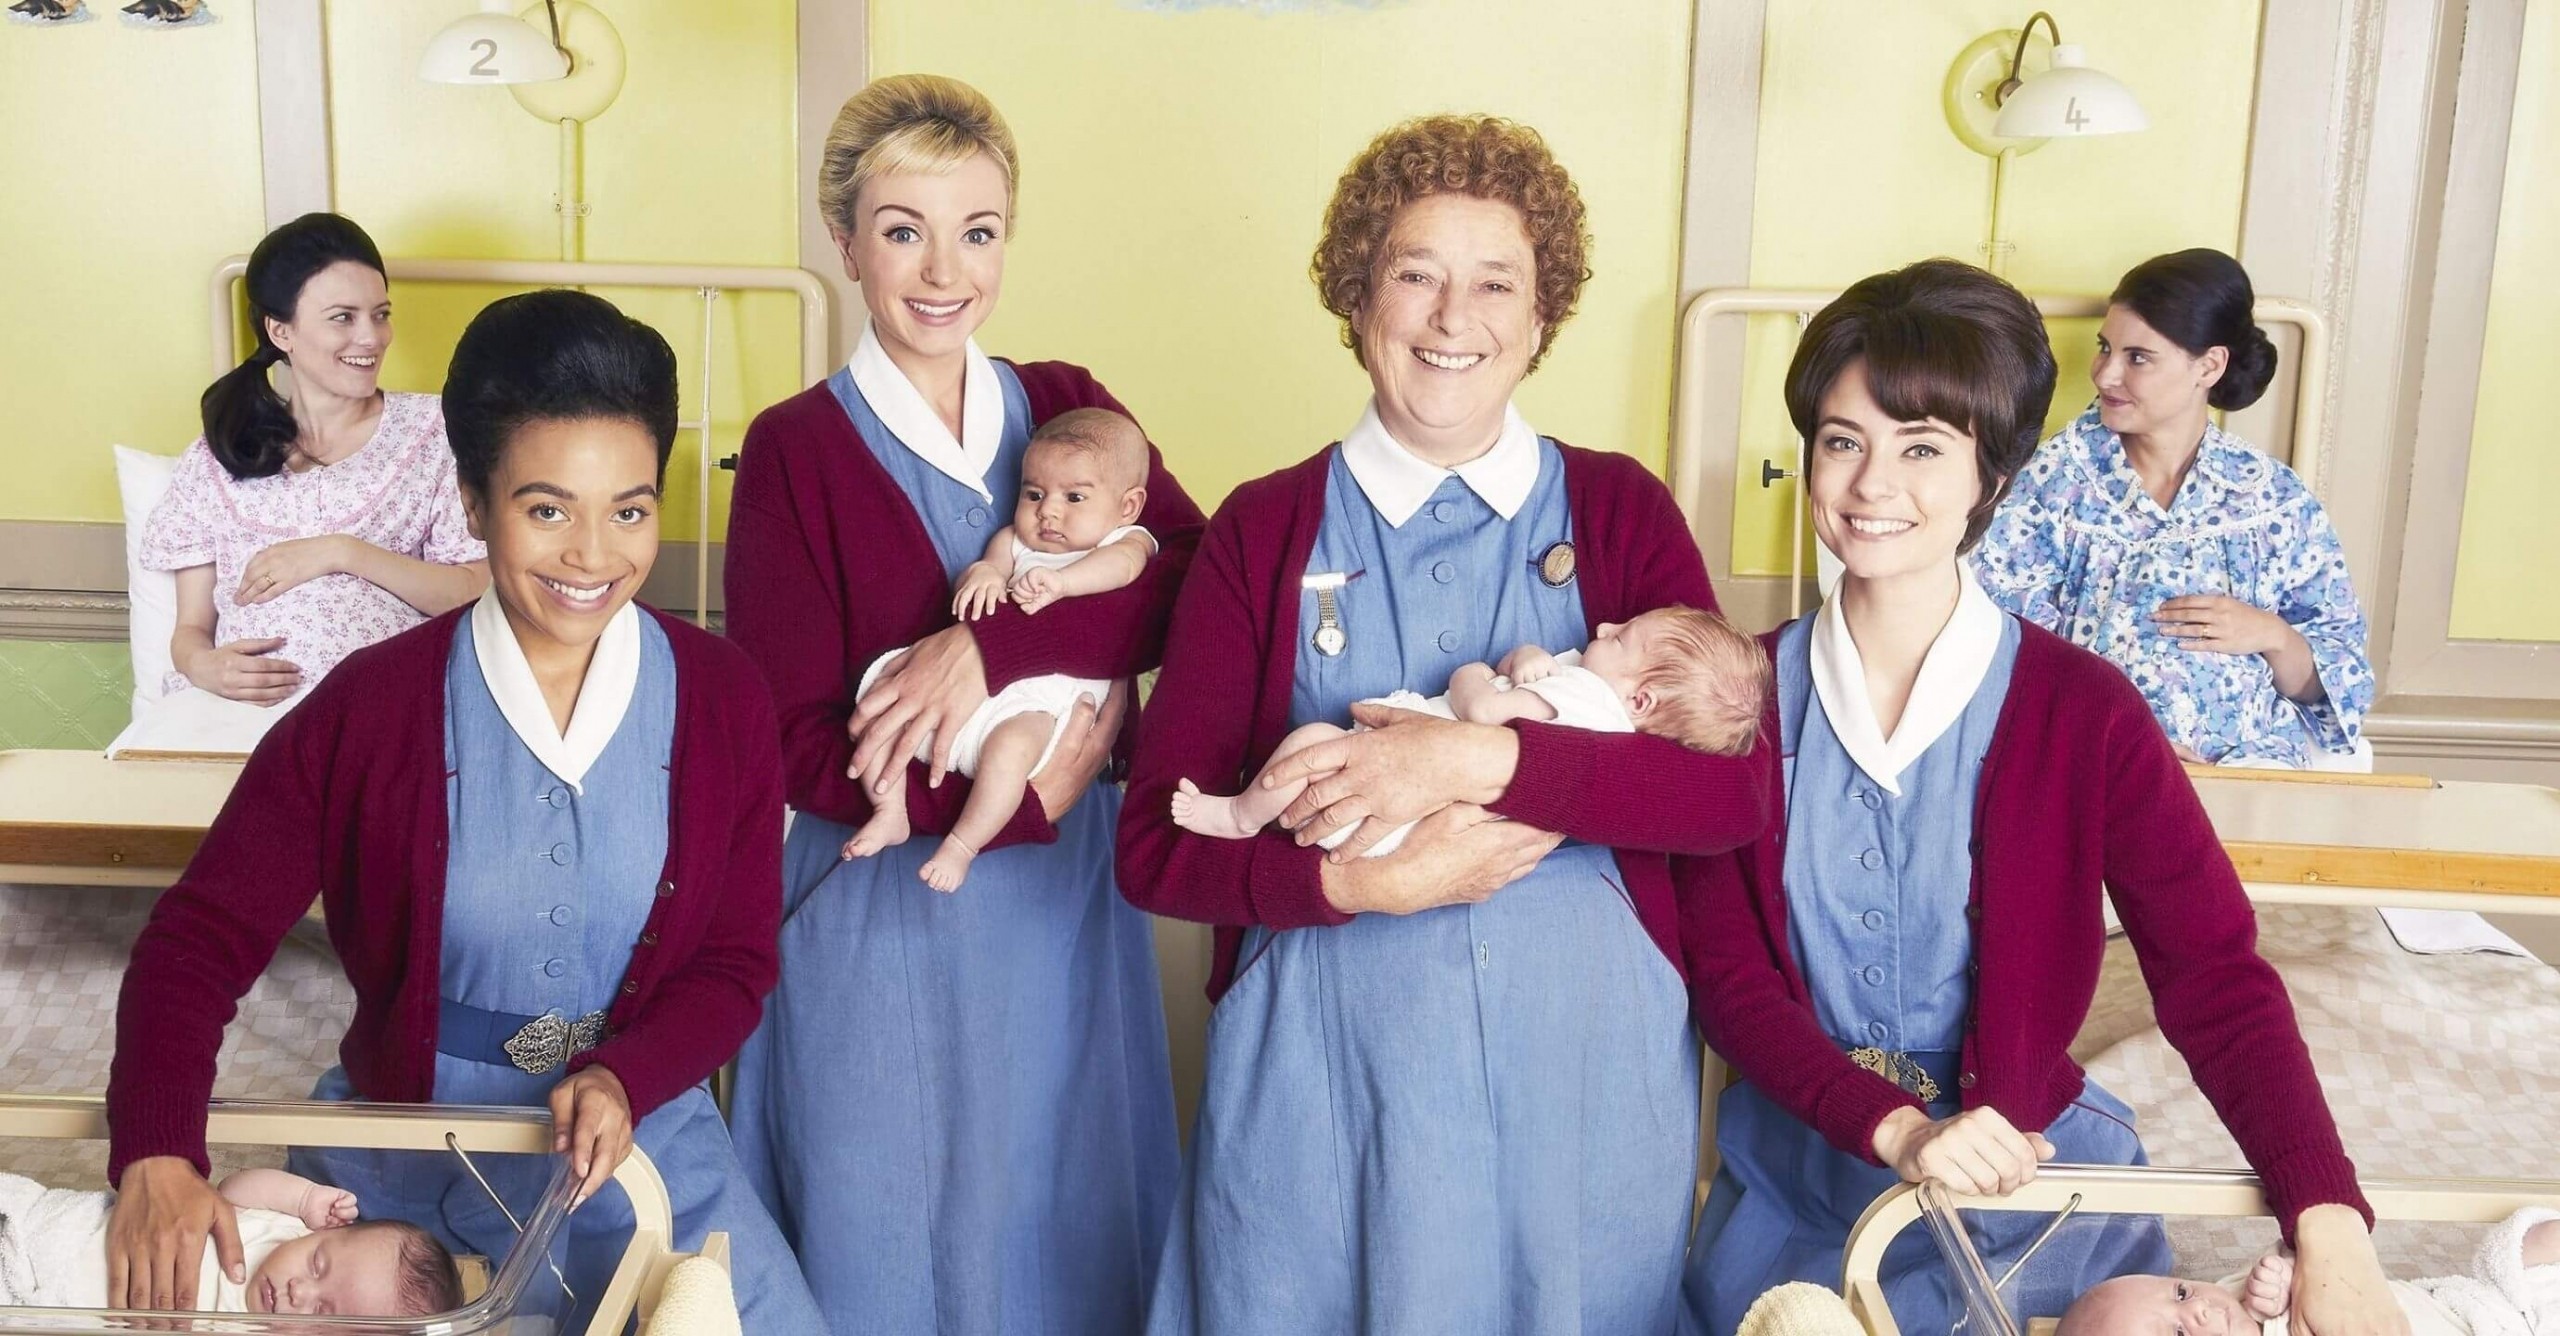 The midwives stand in a hospital ward with newly born babies smiling at the camera